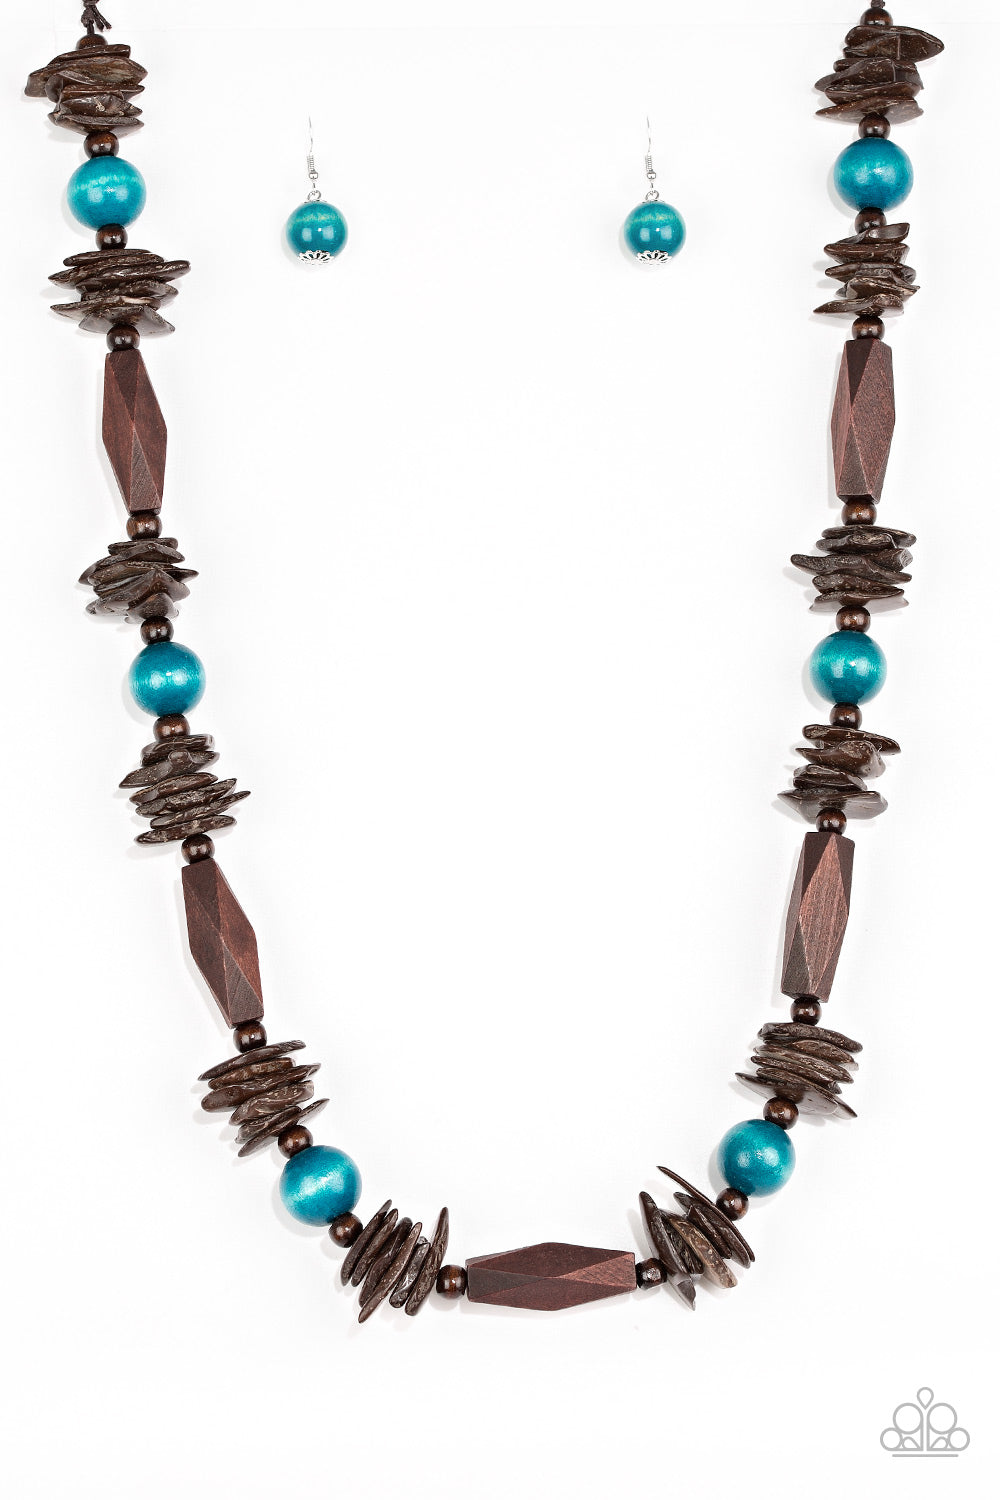 COZUMEL COAST - BLUE AND BROWN WOODEN NECKLACE